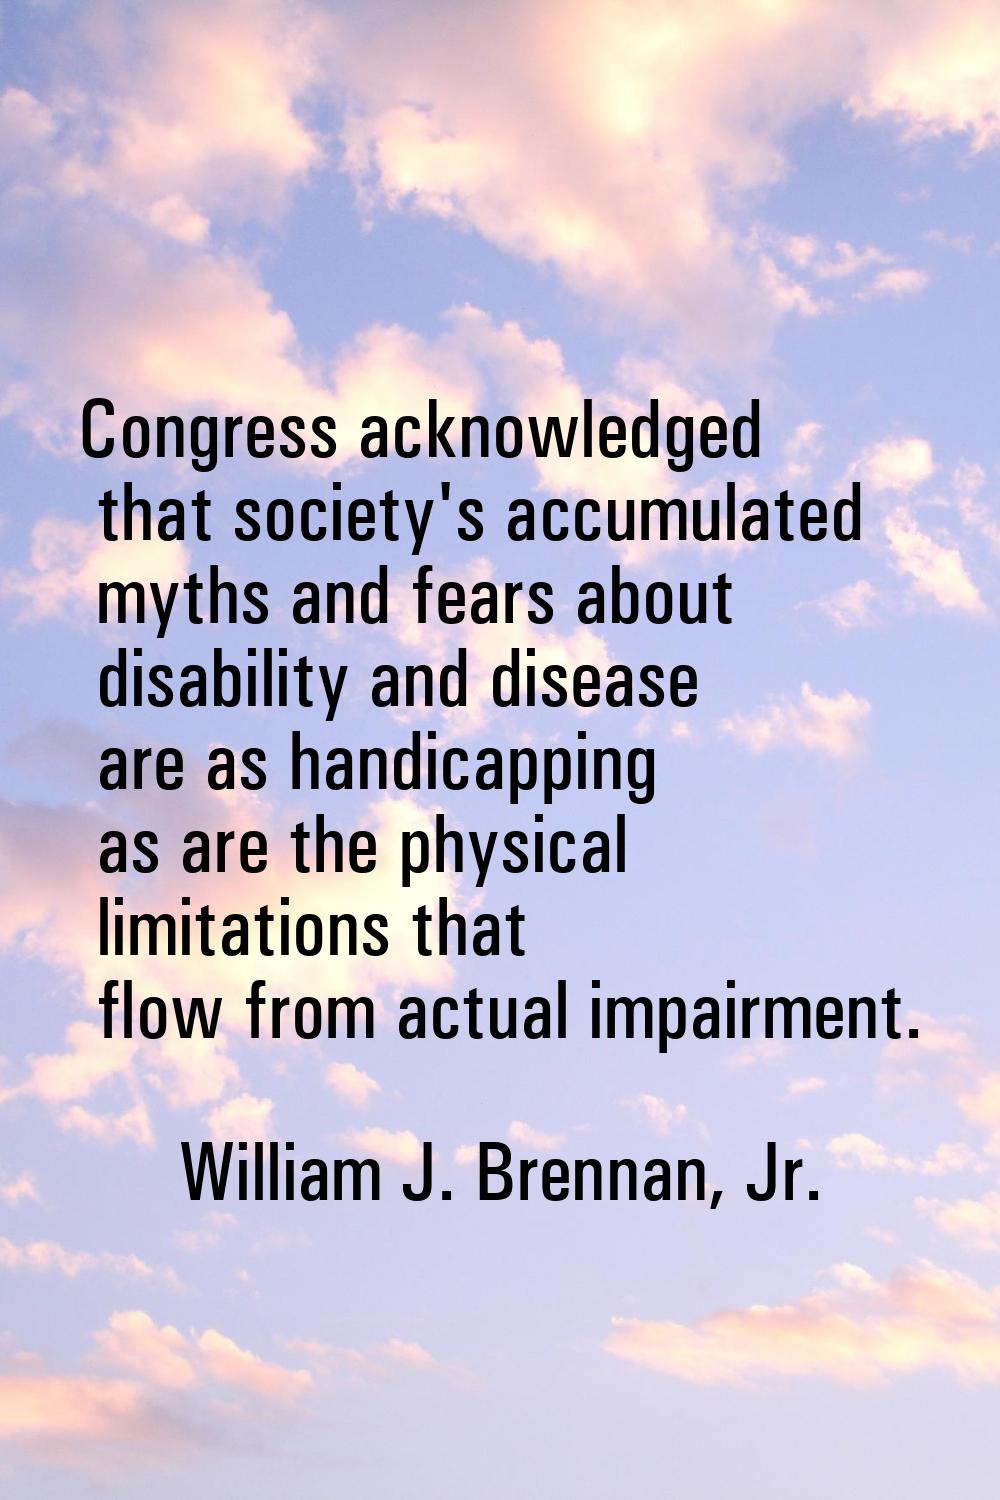 Congress acknowledged that society's accumulated myths and fears about disability and disease are a